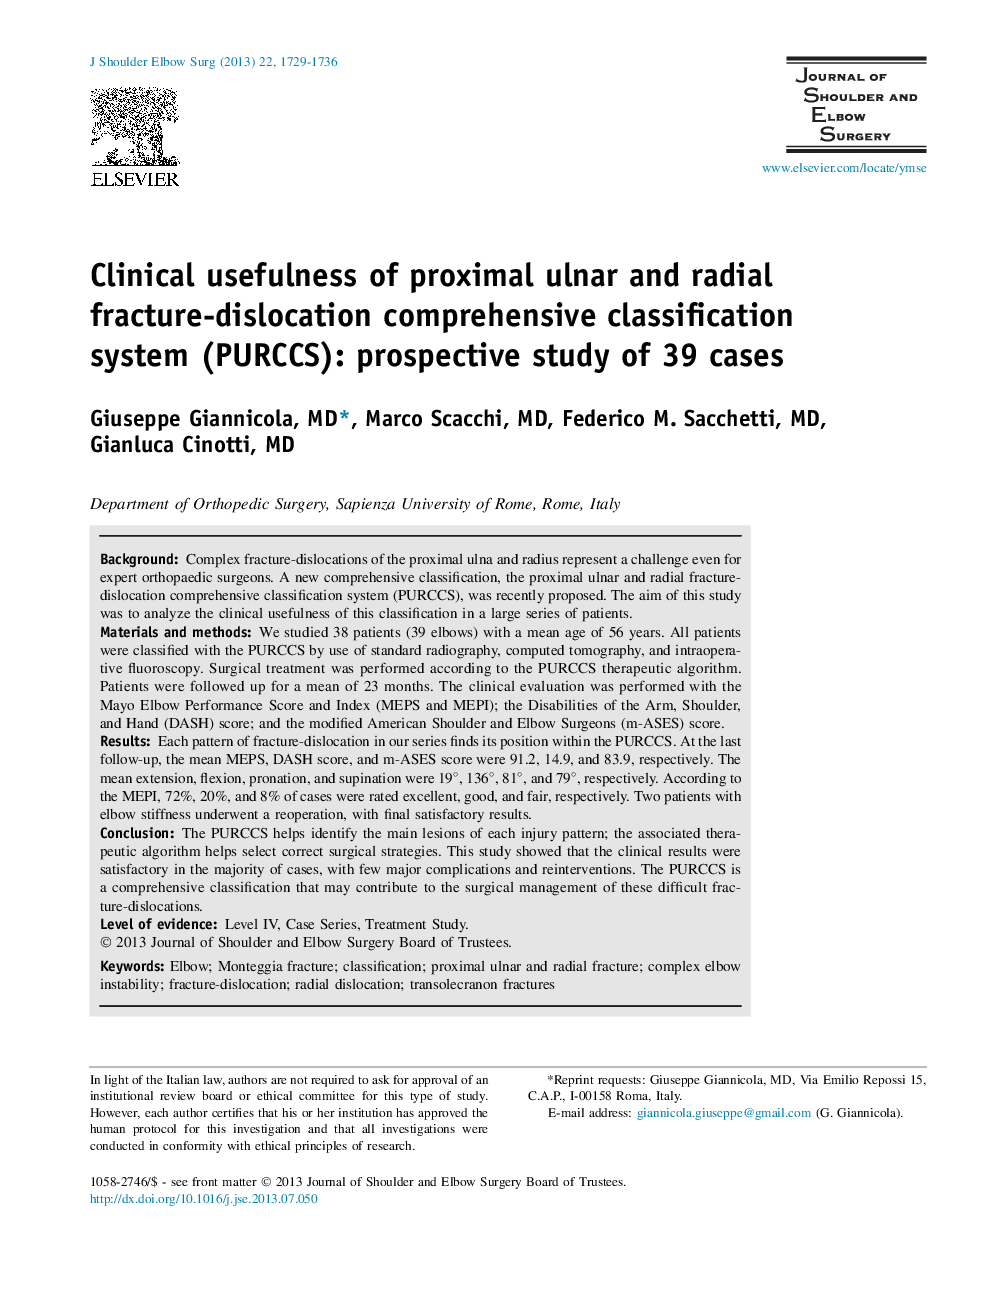 Clinical usefulness of proximal ulnar and radial fracture-dislocation comprehensive classification system (PURCCS): prospective study of 39 cases 